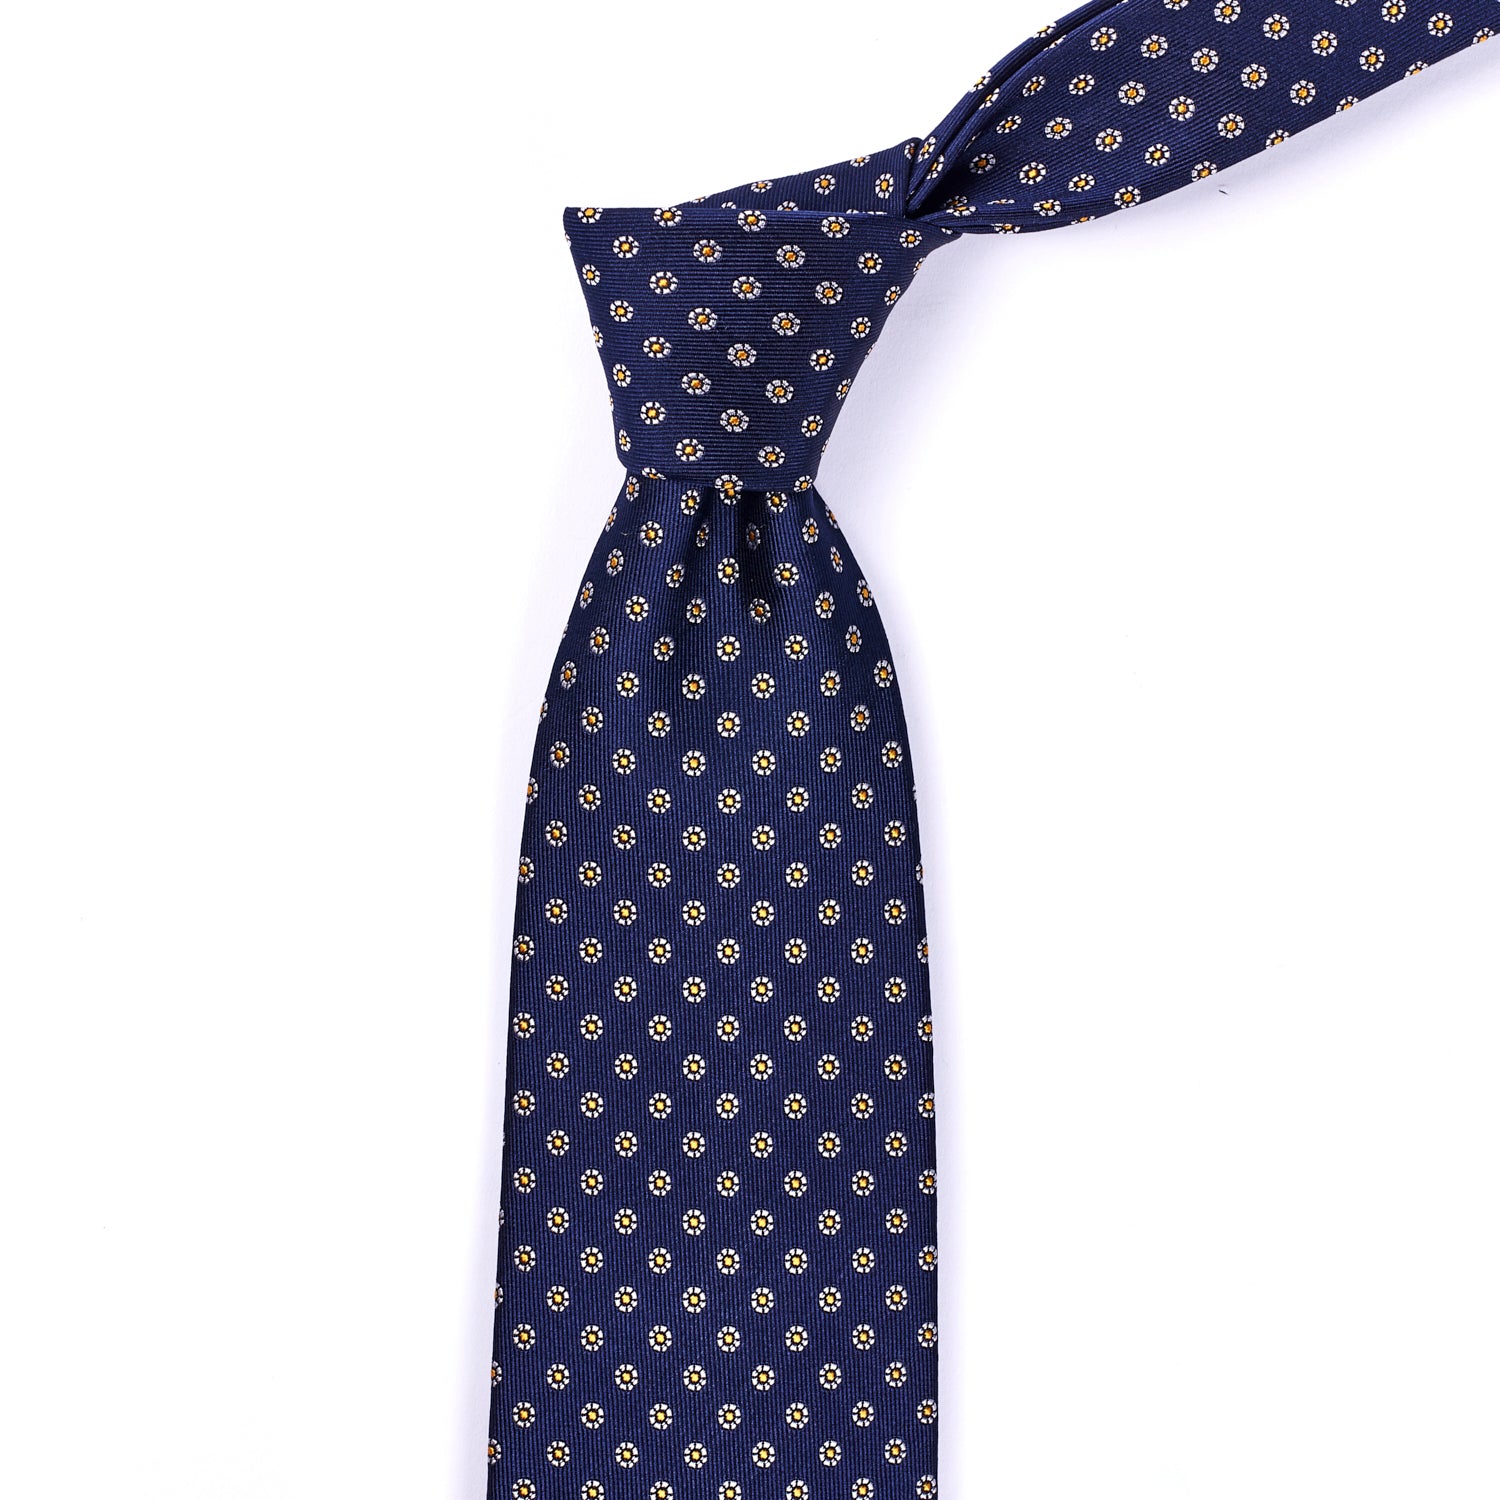 Sovereign Grade Midnight Navy Floral Jacquard Tie, 150 cm by KirbyAllison.com is a handmade polka dot necktie in navy with gold dots of high quality.